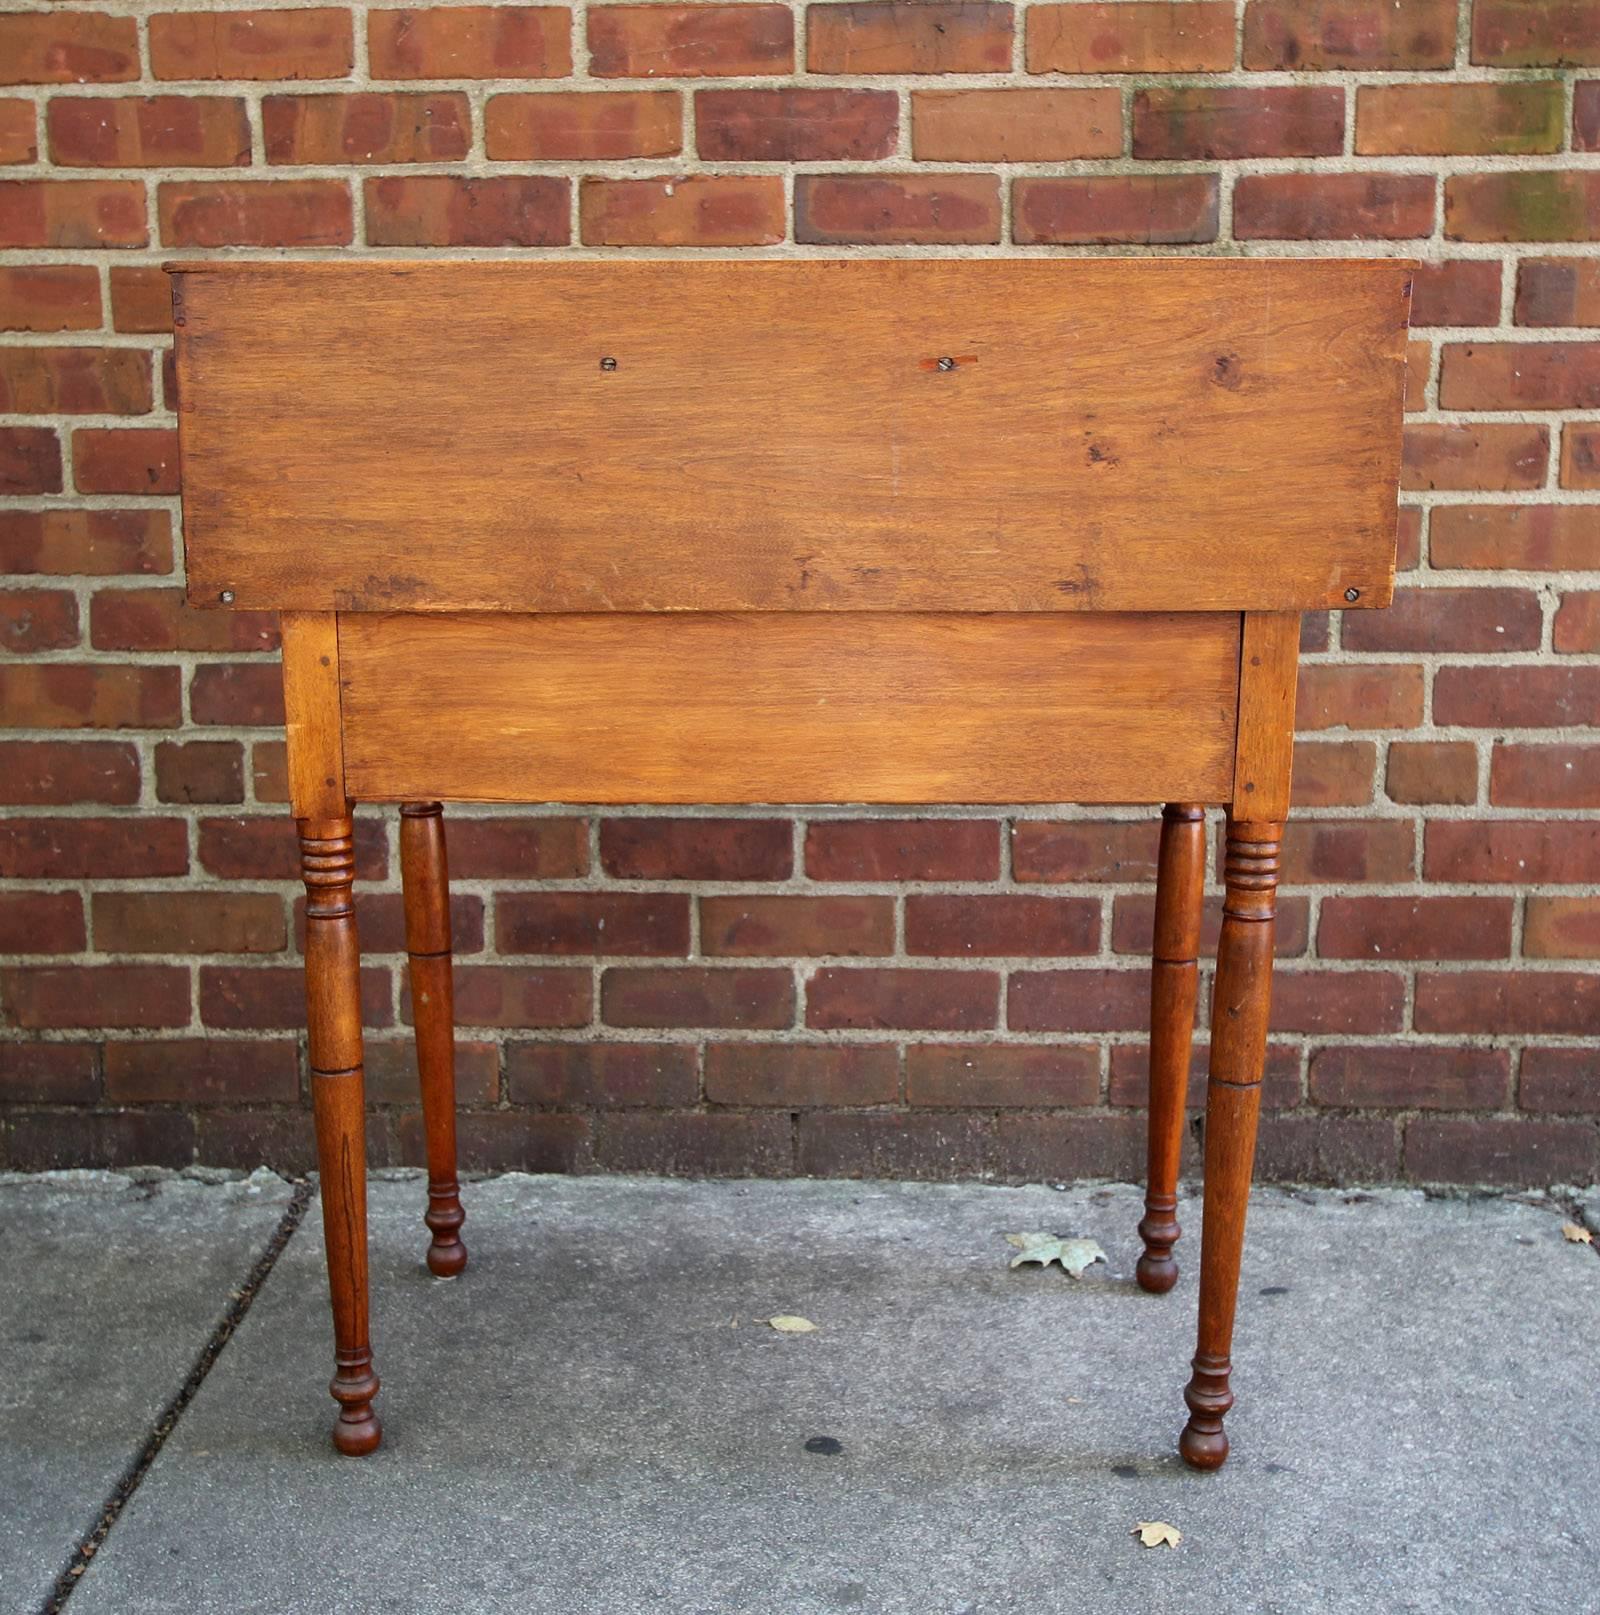 Mid-19th Century New England Walnut Side Table with Strong Square Backsplash, circa 1830